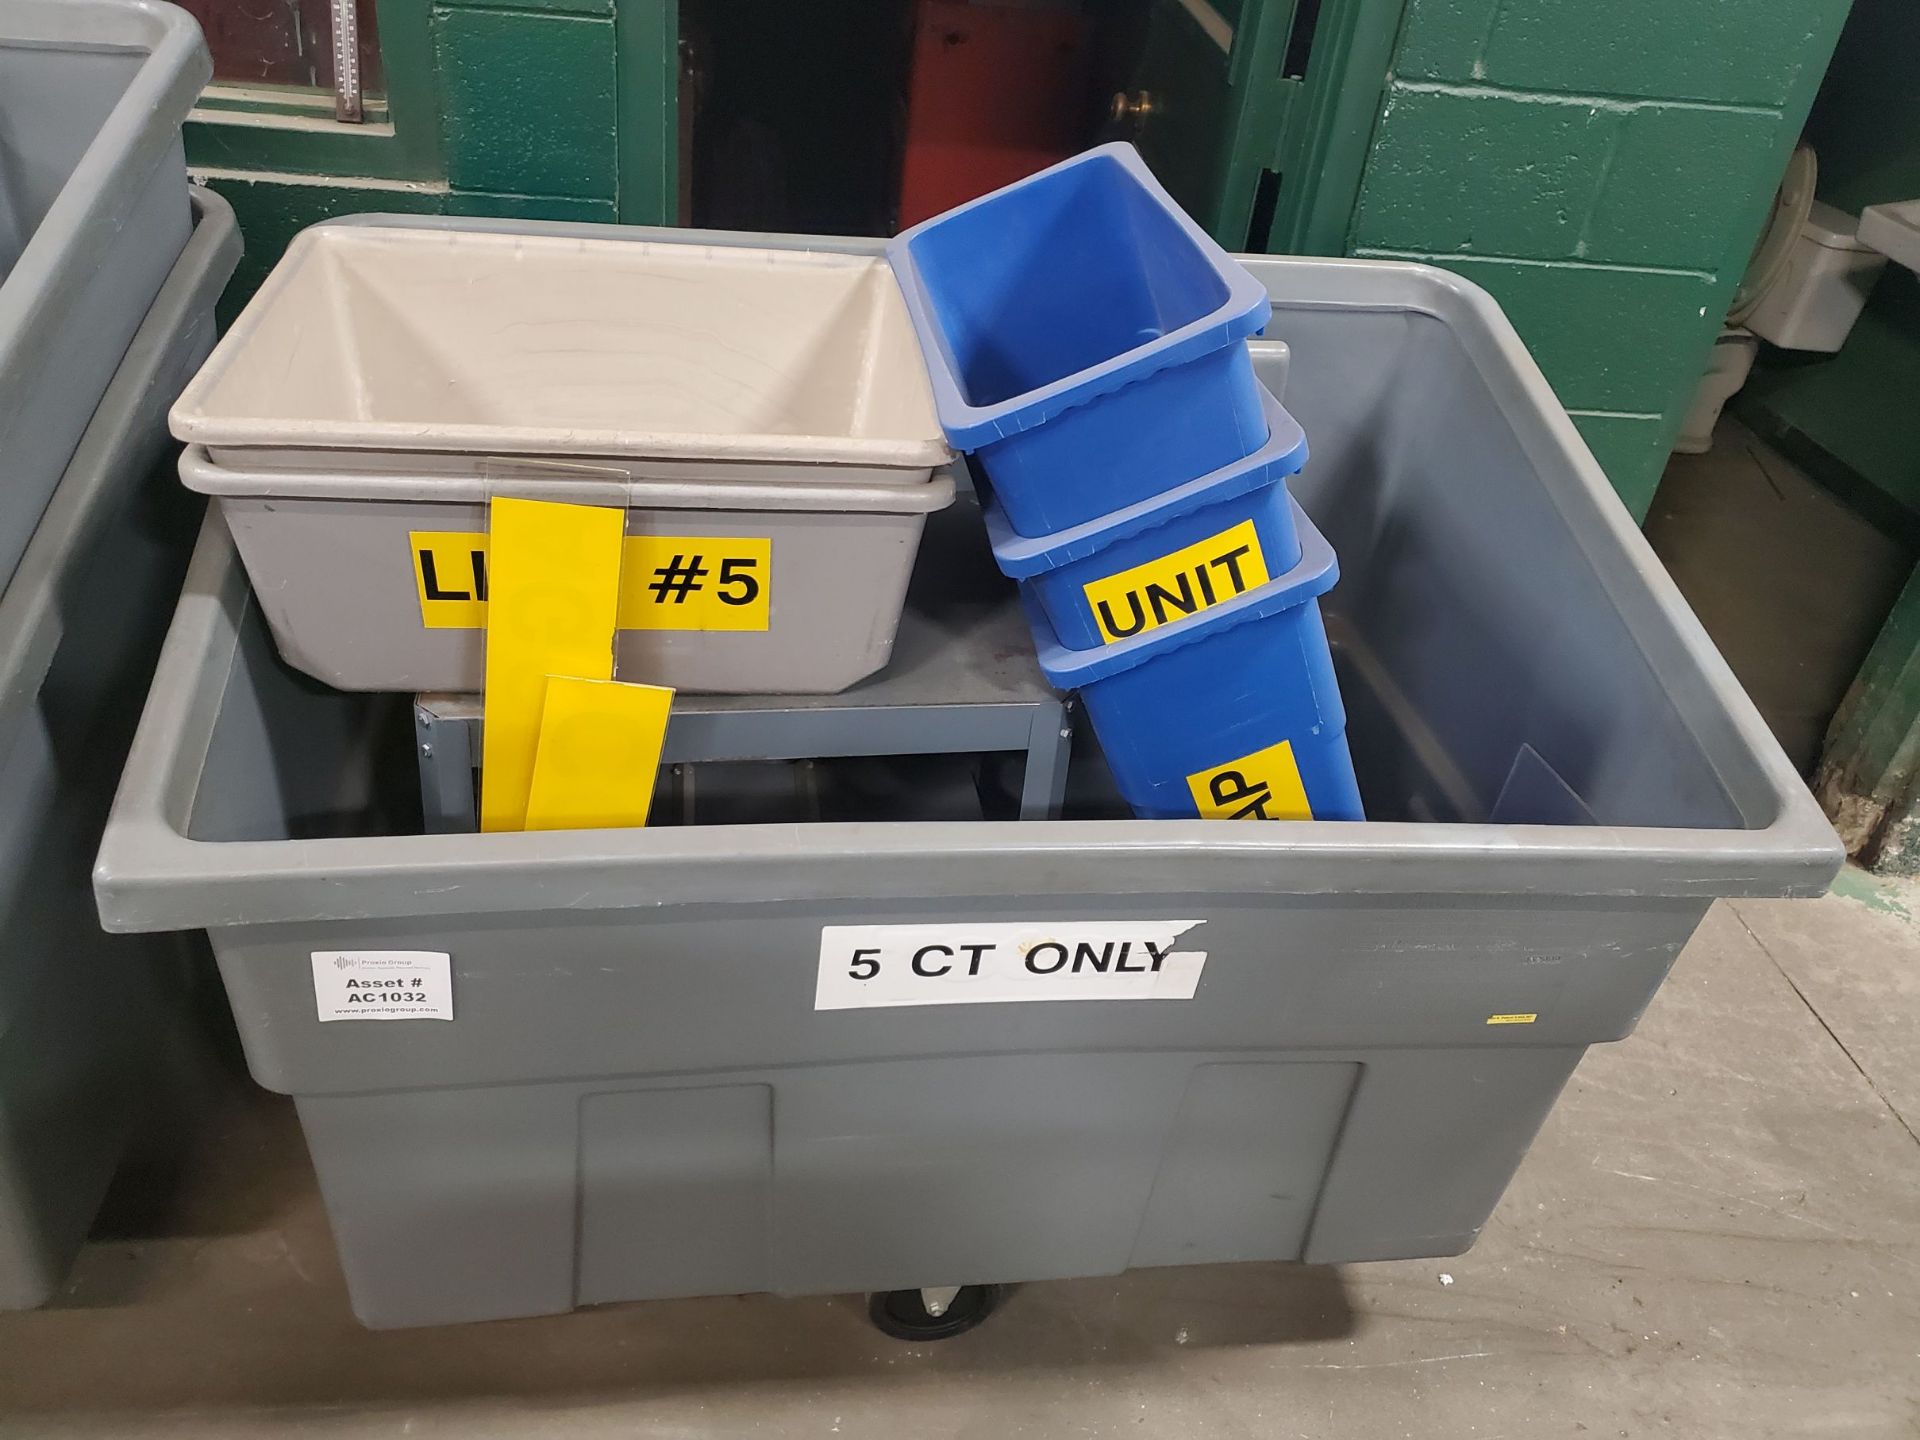 (1) 4-Wheel Castered Totes (3) Recycling Cans, (2) Totes, (1) 2-Tier Work Station